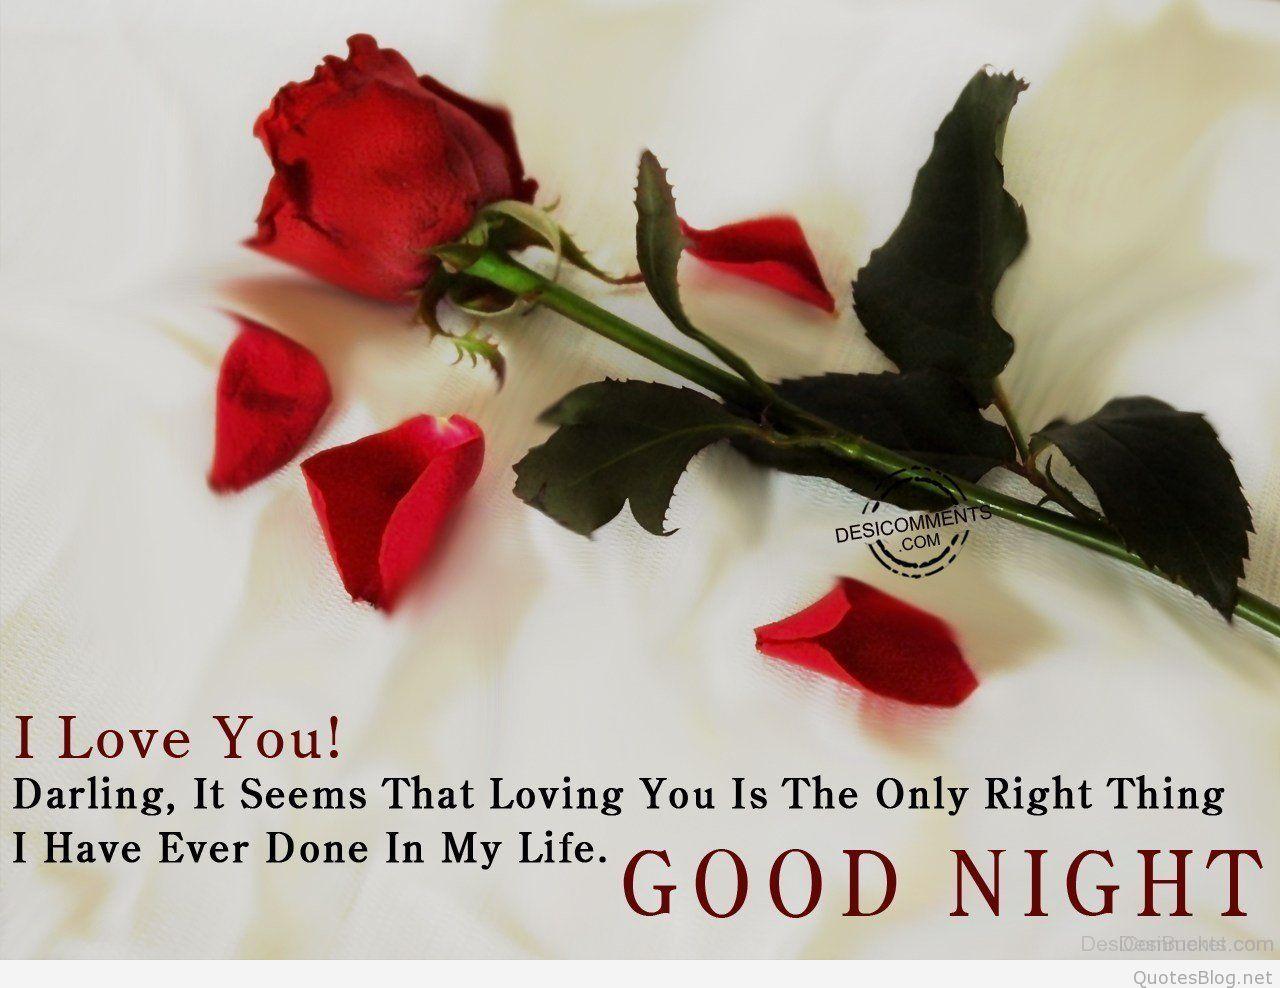 Good Night Rose Image and Message